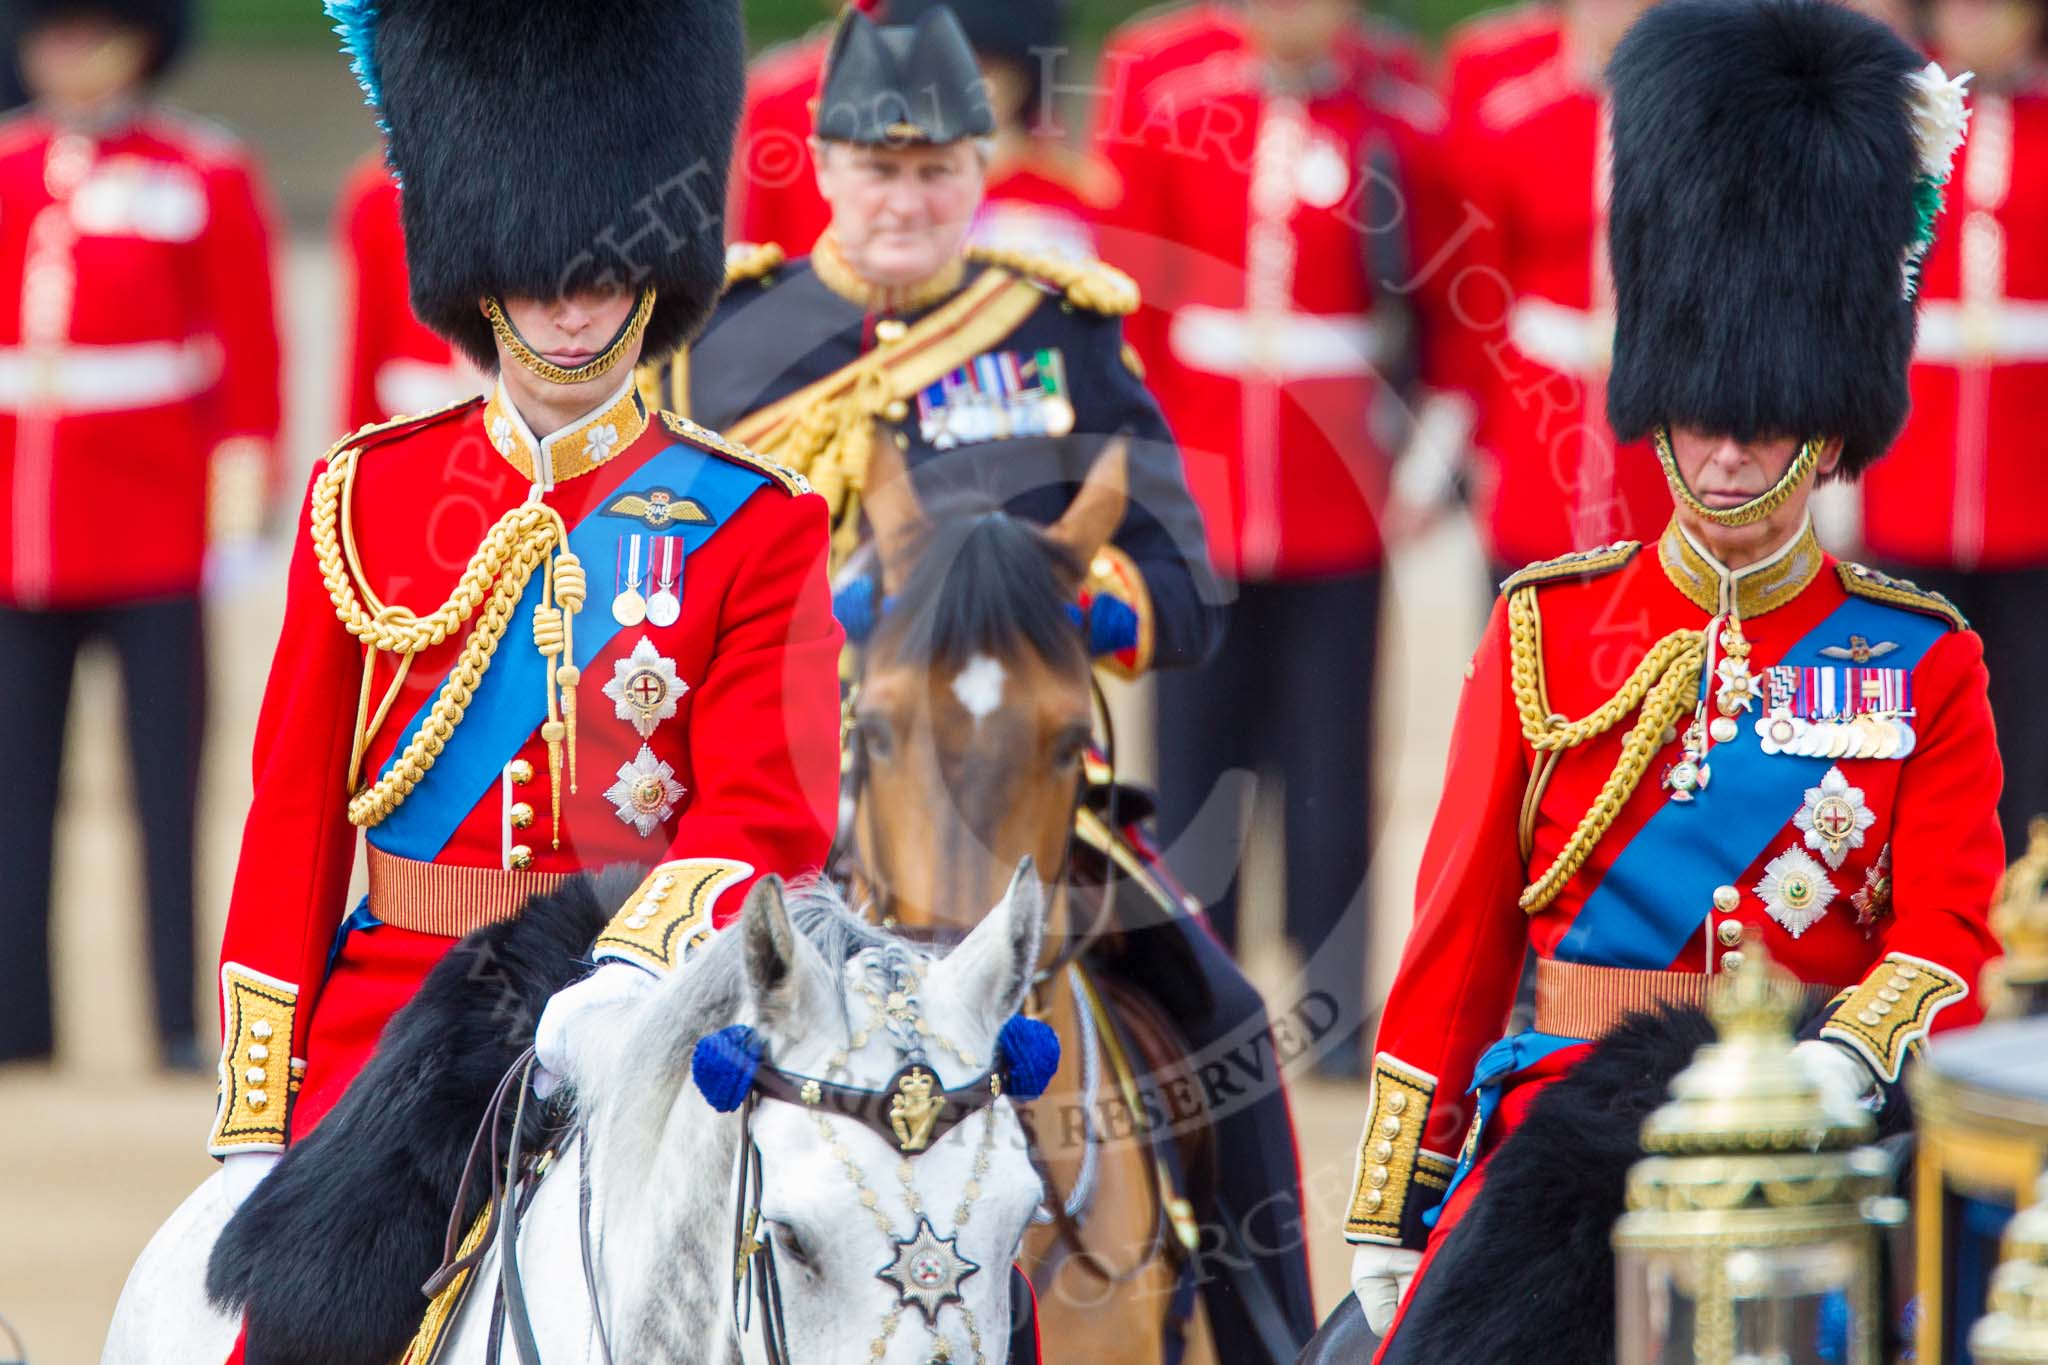 Trooping the Colour 2013: HRH The Duke of Cambridge, Colonel Irish Guards and HRH The Prince of Wales, Colonel Welsh Guards on horseback after the Inspection of the line..
Horse Guards Parade, Westminster,
London SW1,

United Kingdom,
on 15 June 2013 at 11:07, image #370